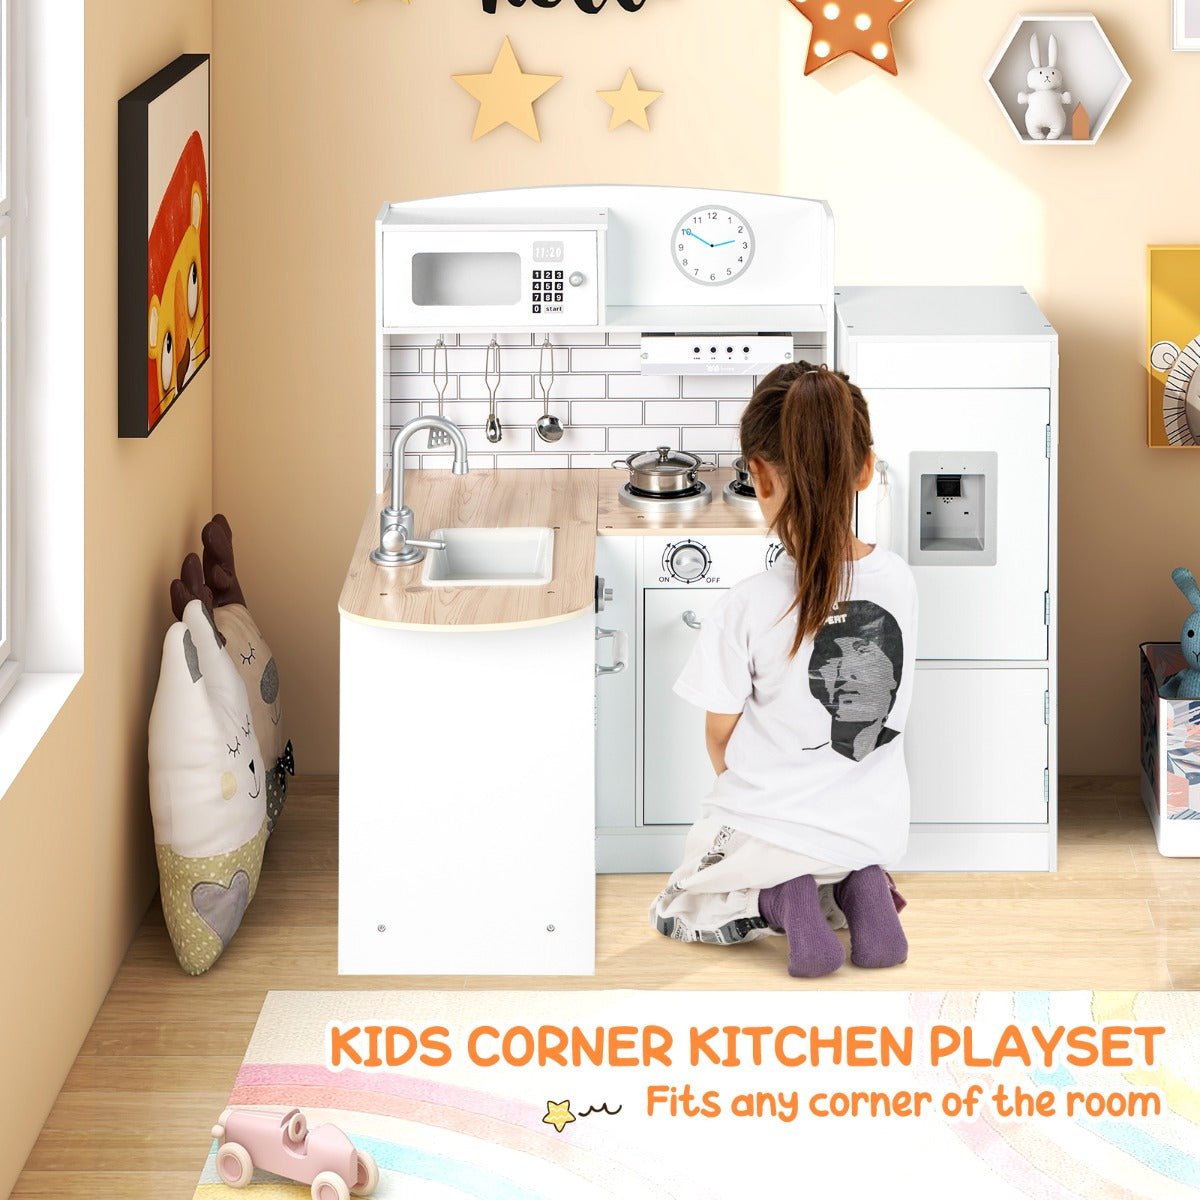 Wholesome Fun: Kids Kitchen Cooking Playset with Microwave & Fridge